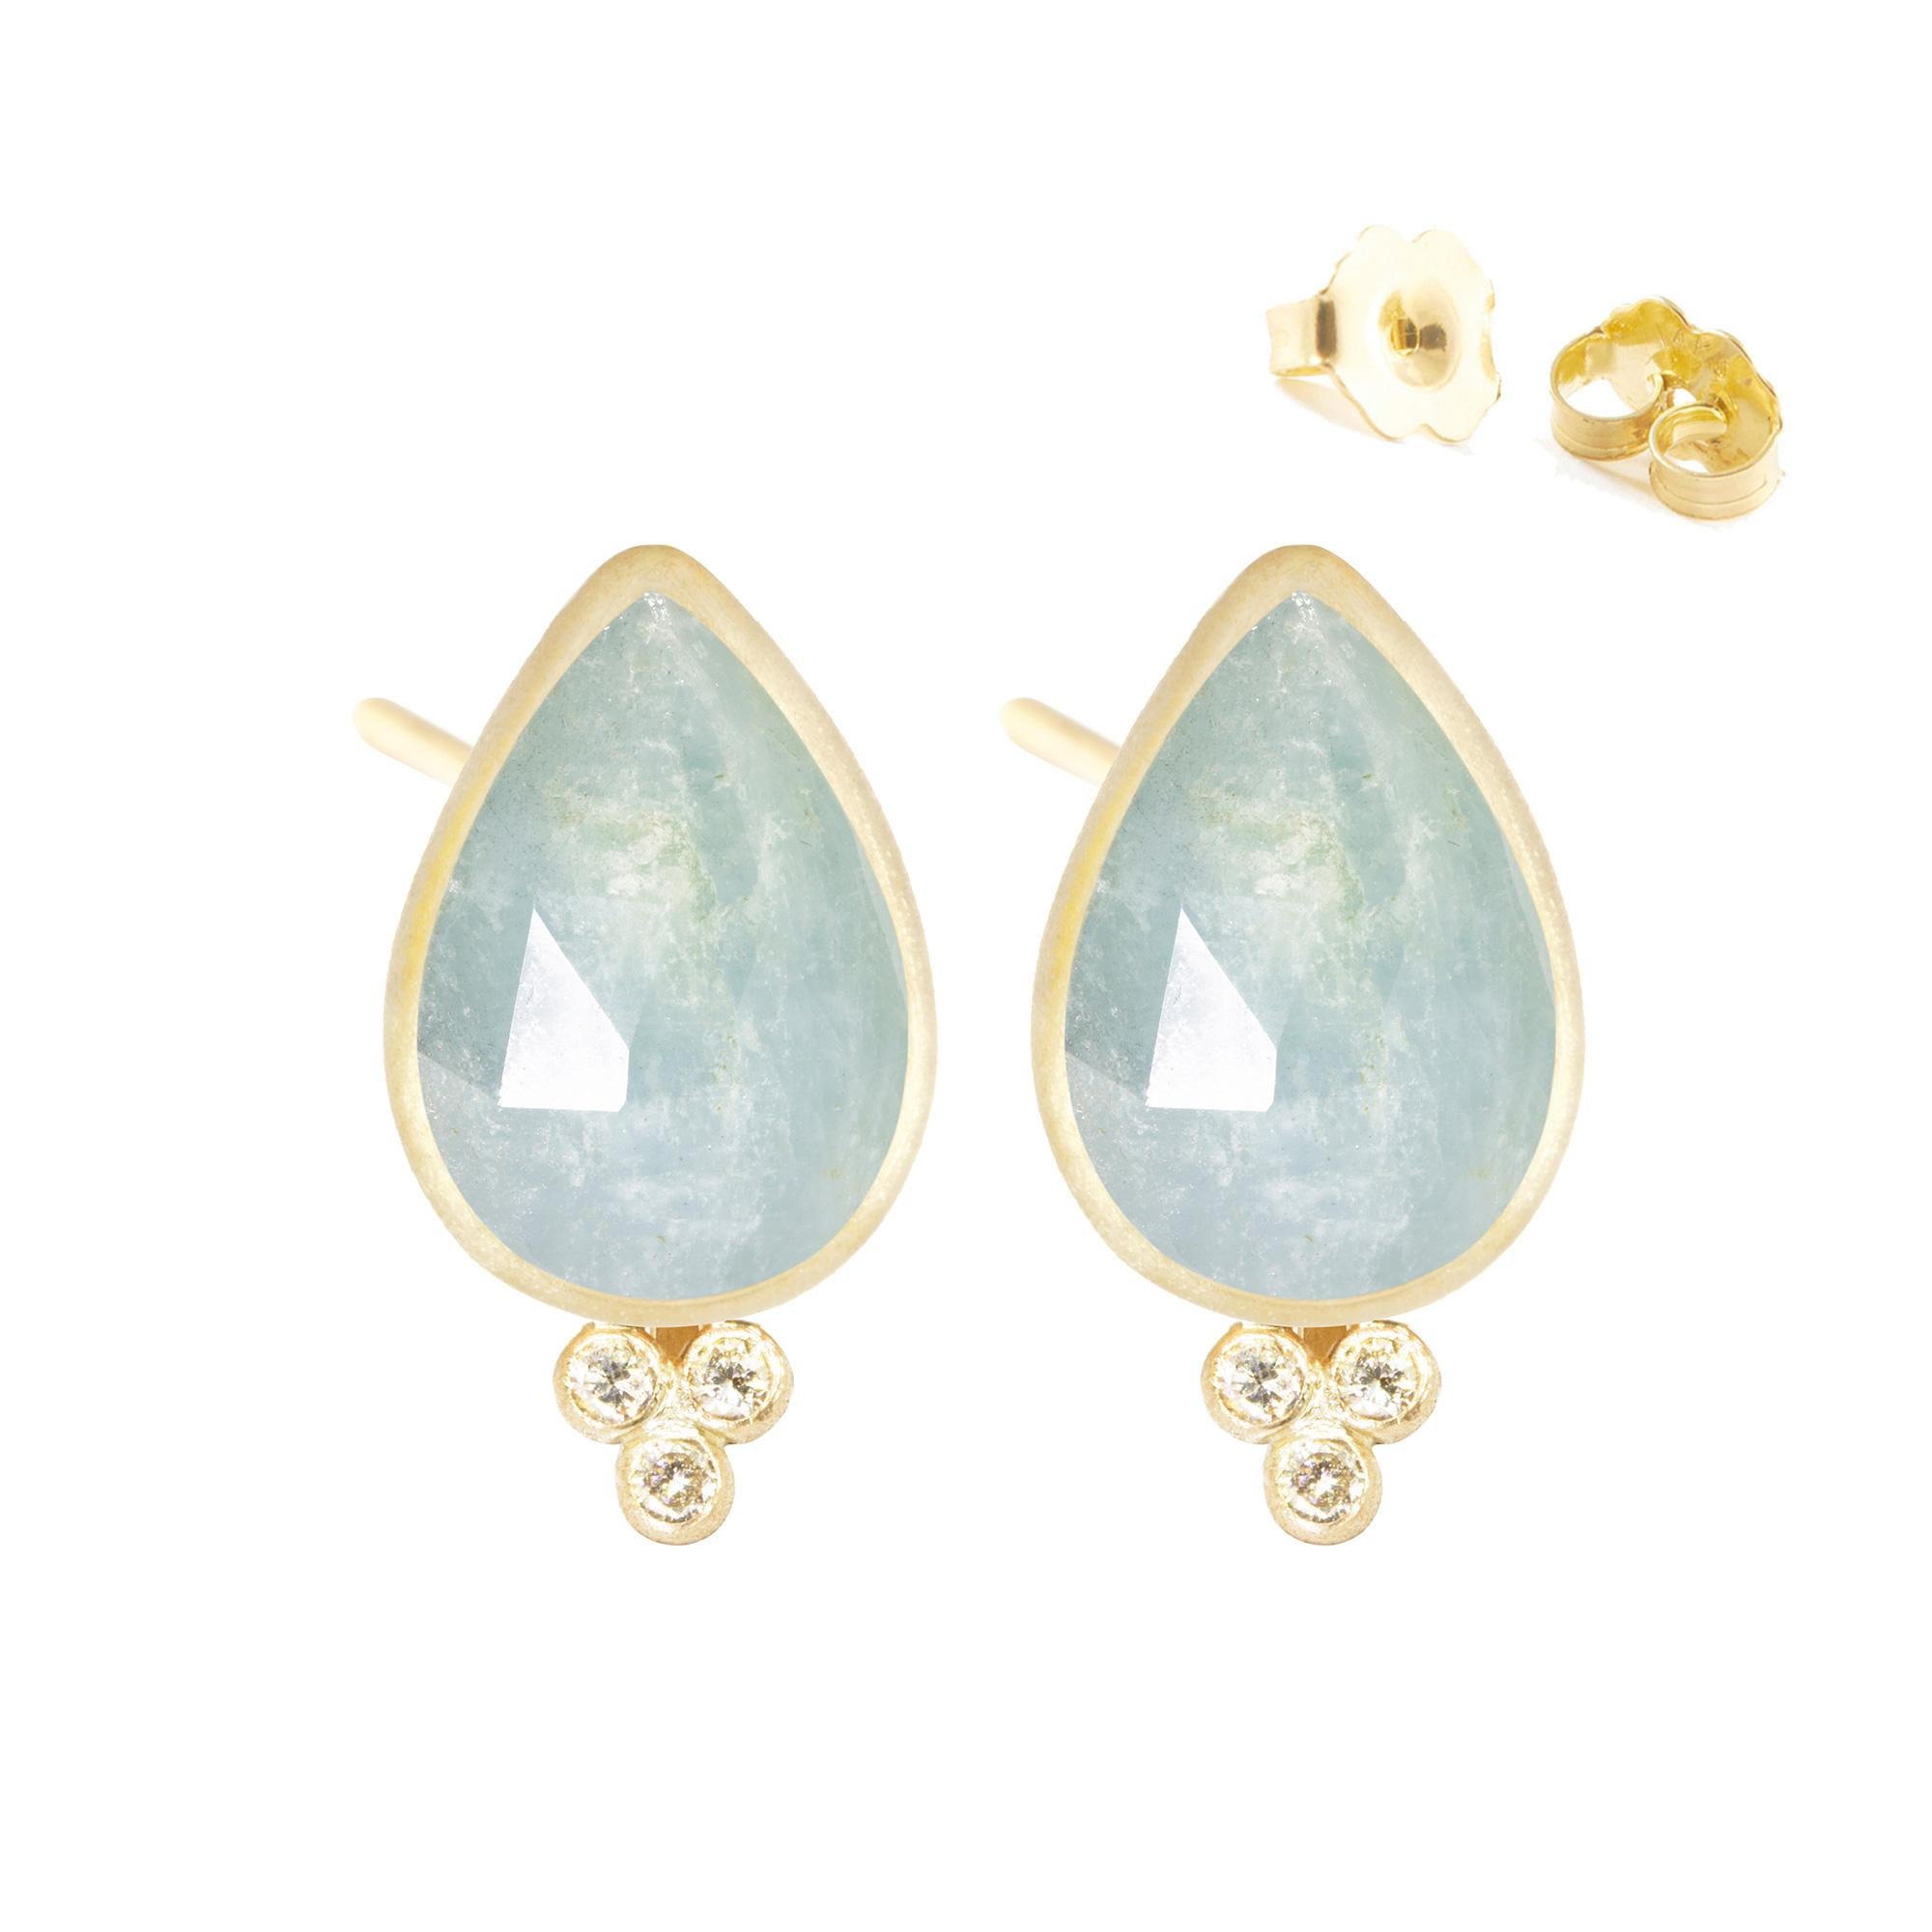 With faceted aquamarine in a petal-like pear shape and sparkling diamonds, the Mia Small Gold Studs bloom to their fullest potential when you wear them with denim, linen, cashmere…basically everything in your closet.

Nina Nguyen Design's